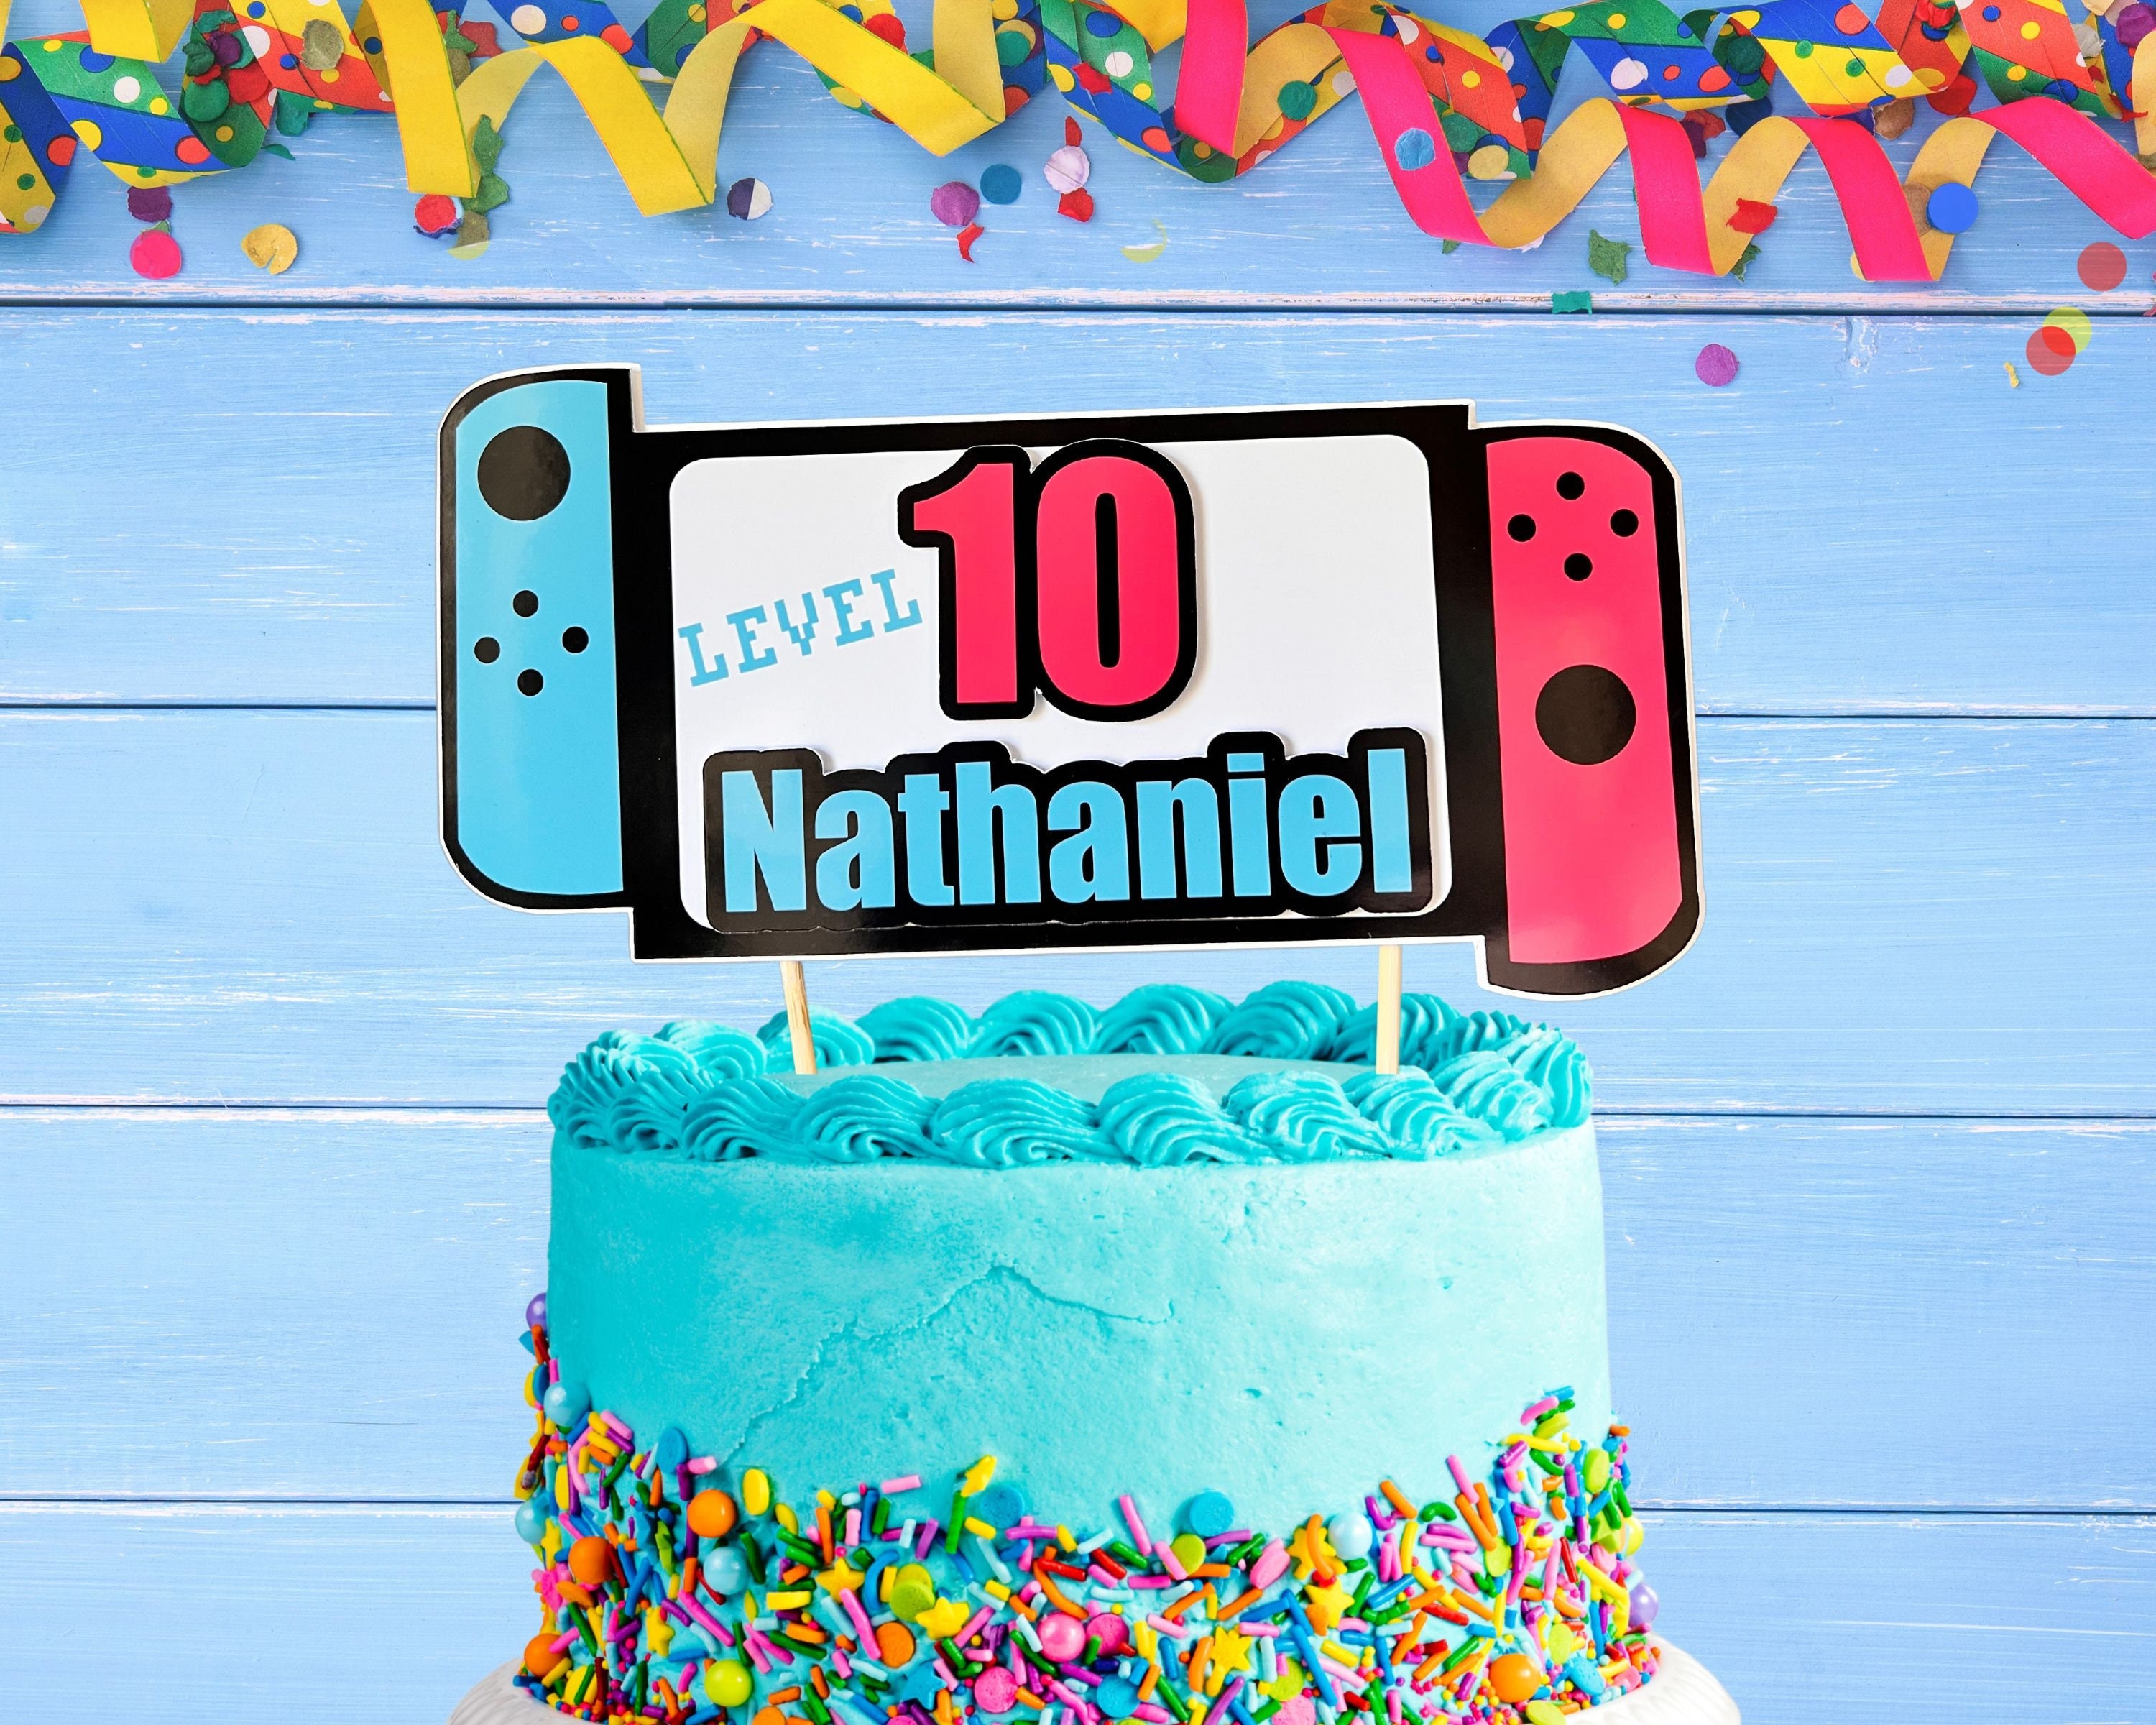 Level Up Video Game Cake Toppers Happy Birthday Party Favors Supplies Baby  Boy Birthday Cake Decoration Party Decorations 